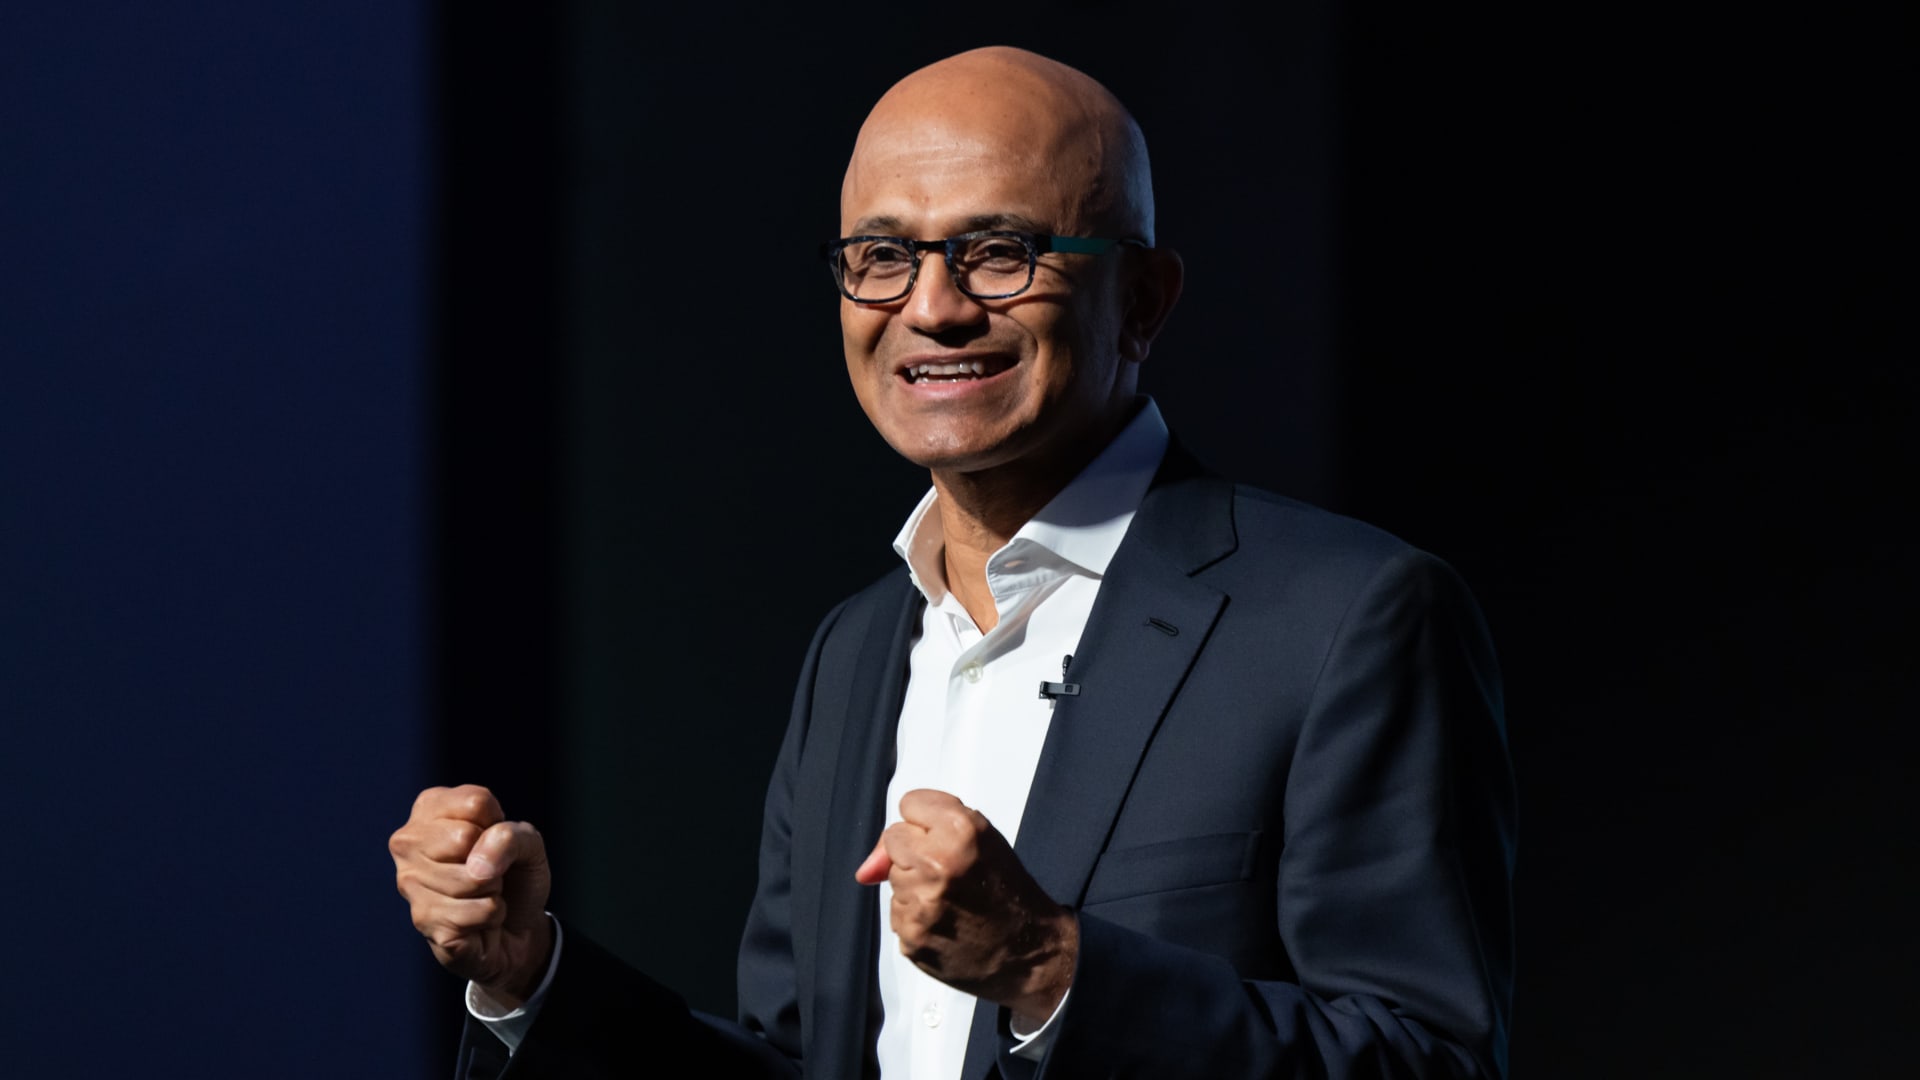 Microsoft beats on earnings as cloud unit shows strong growth